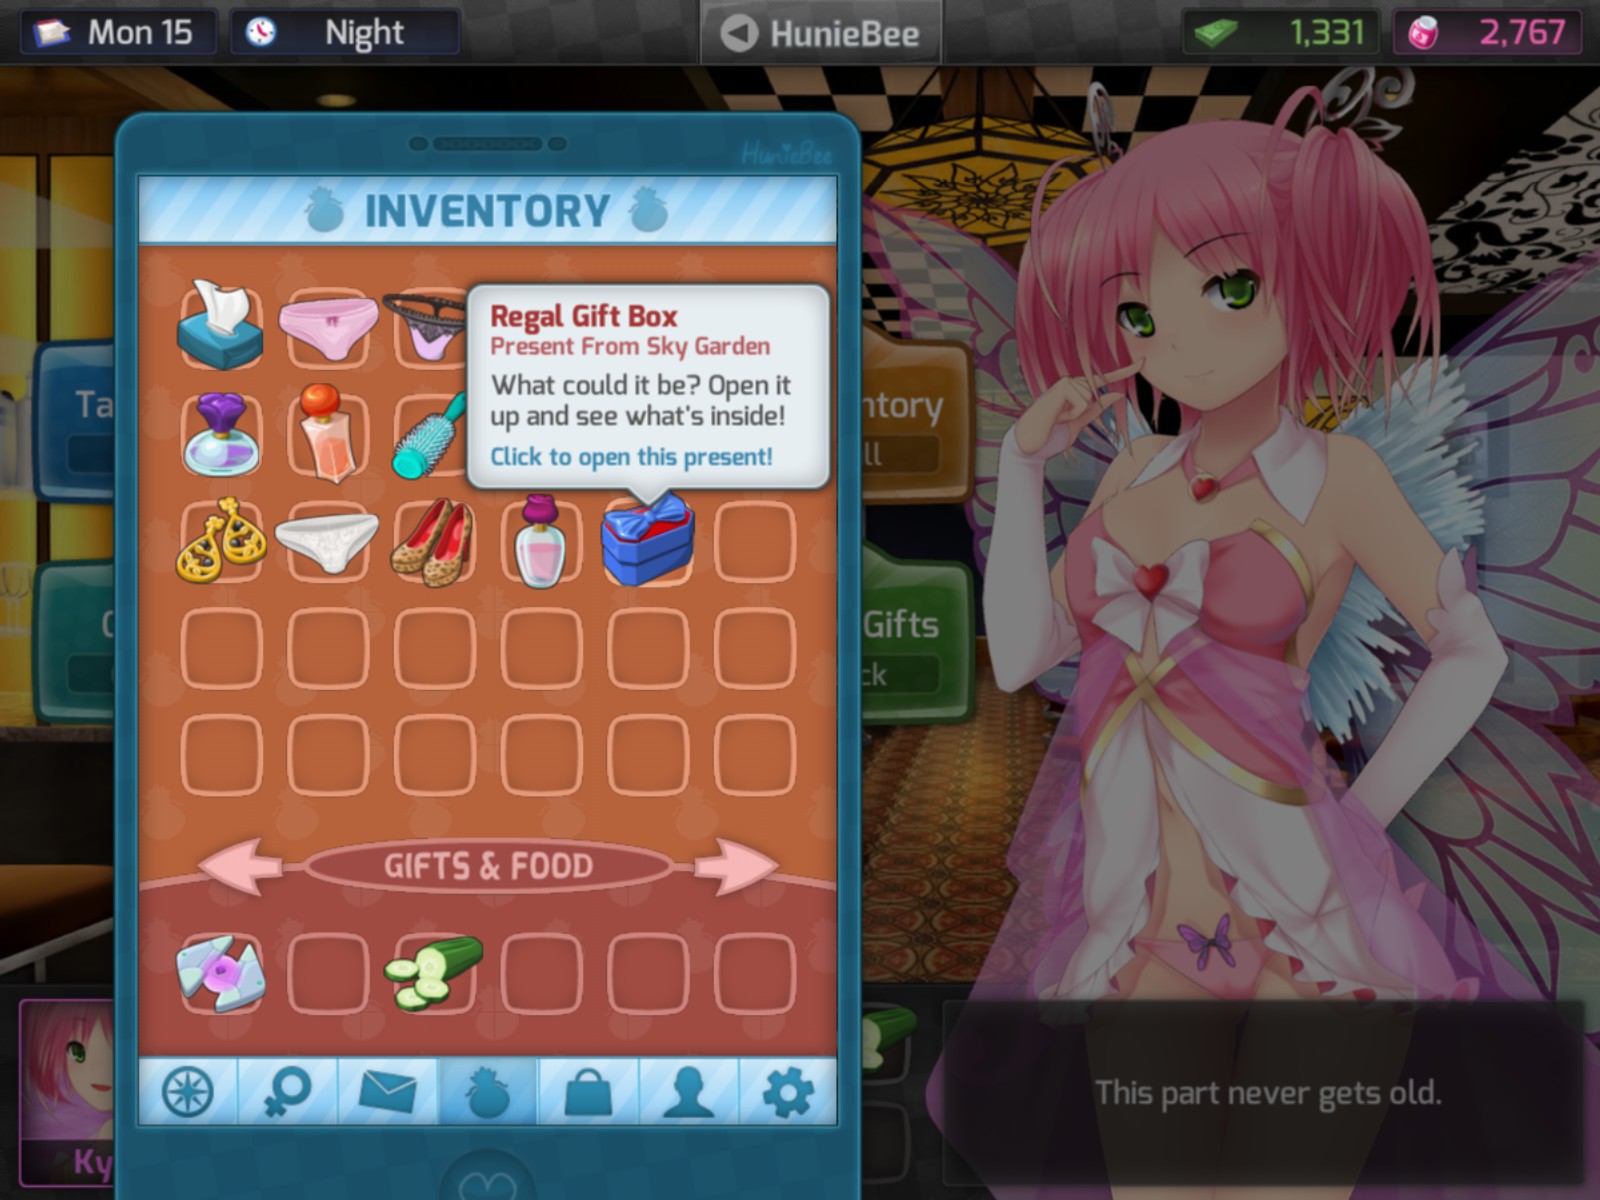 deland recommends how to sext in huniepop pic